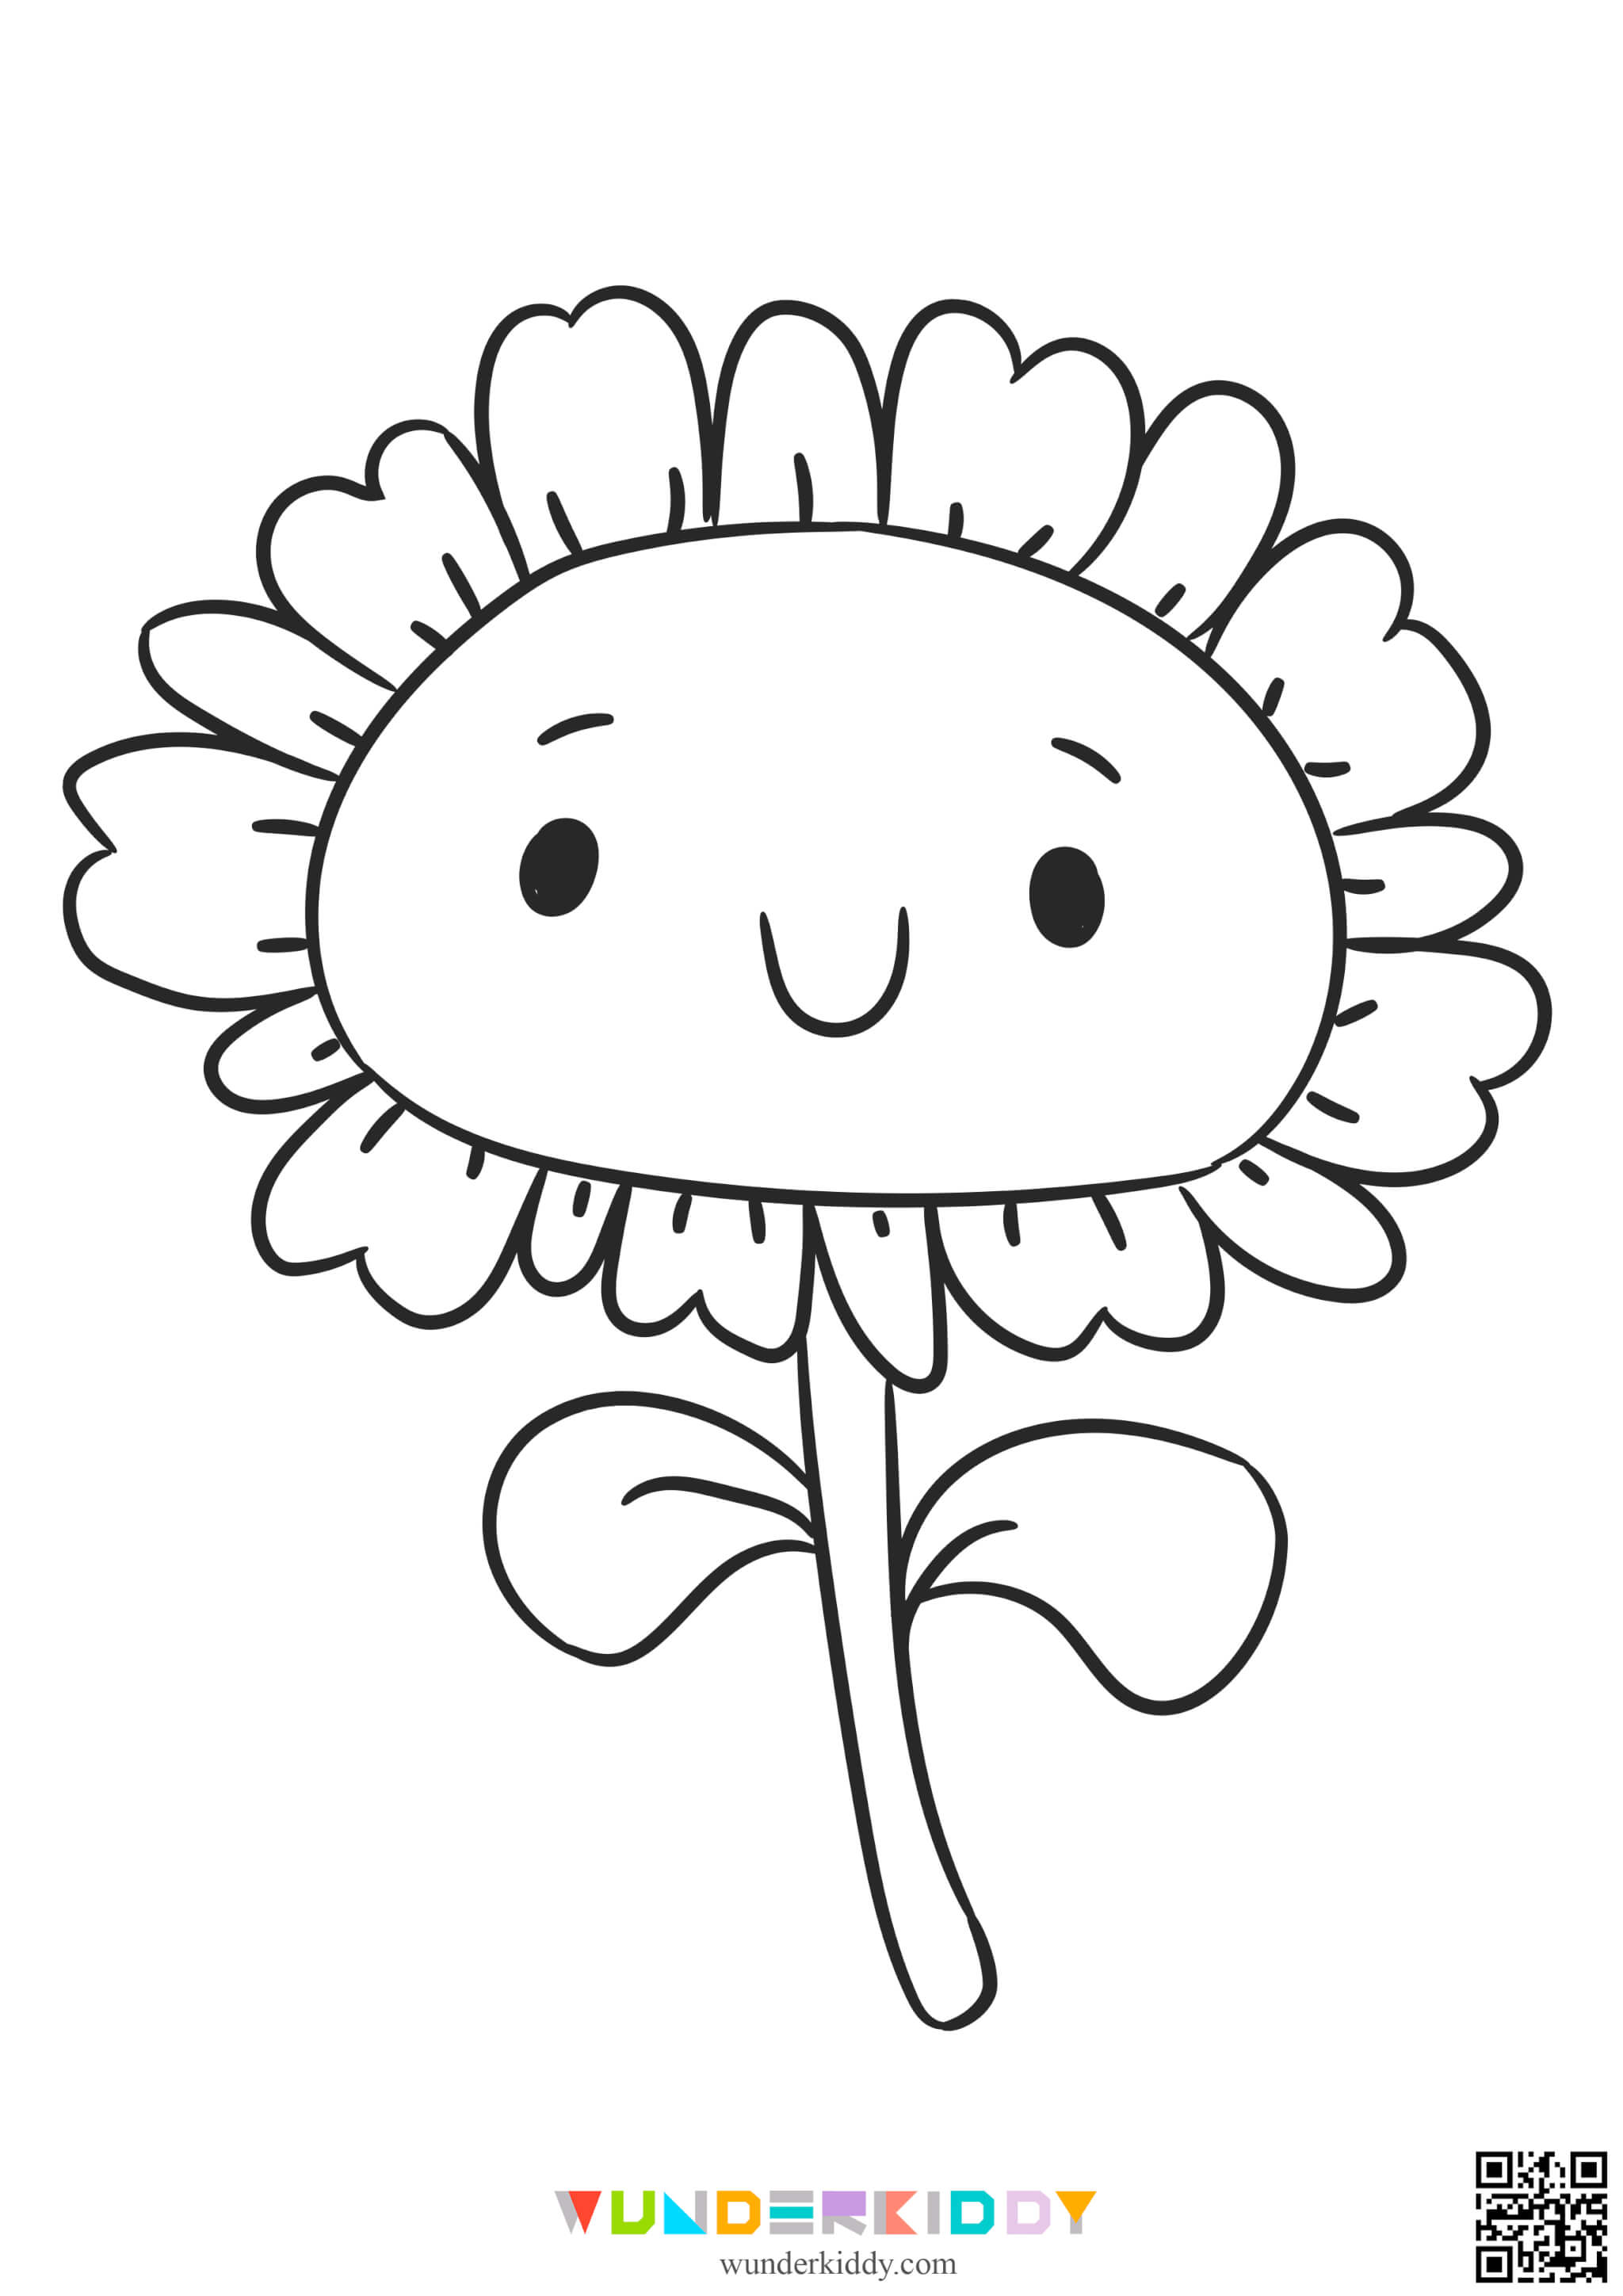 Spring Coloring Pages - Image 15